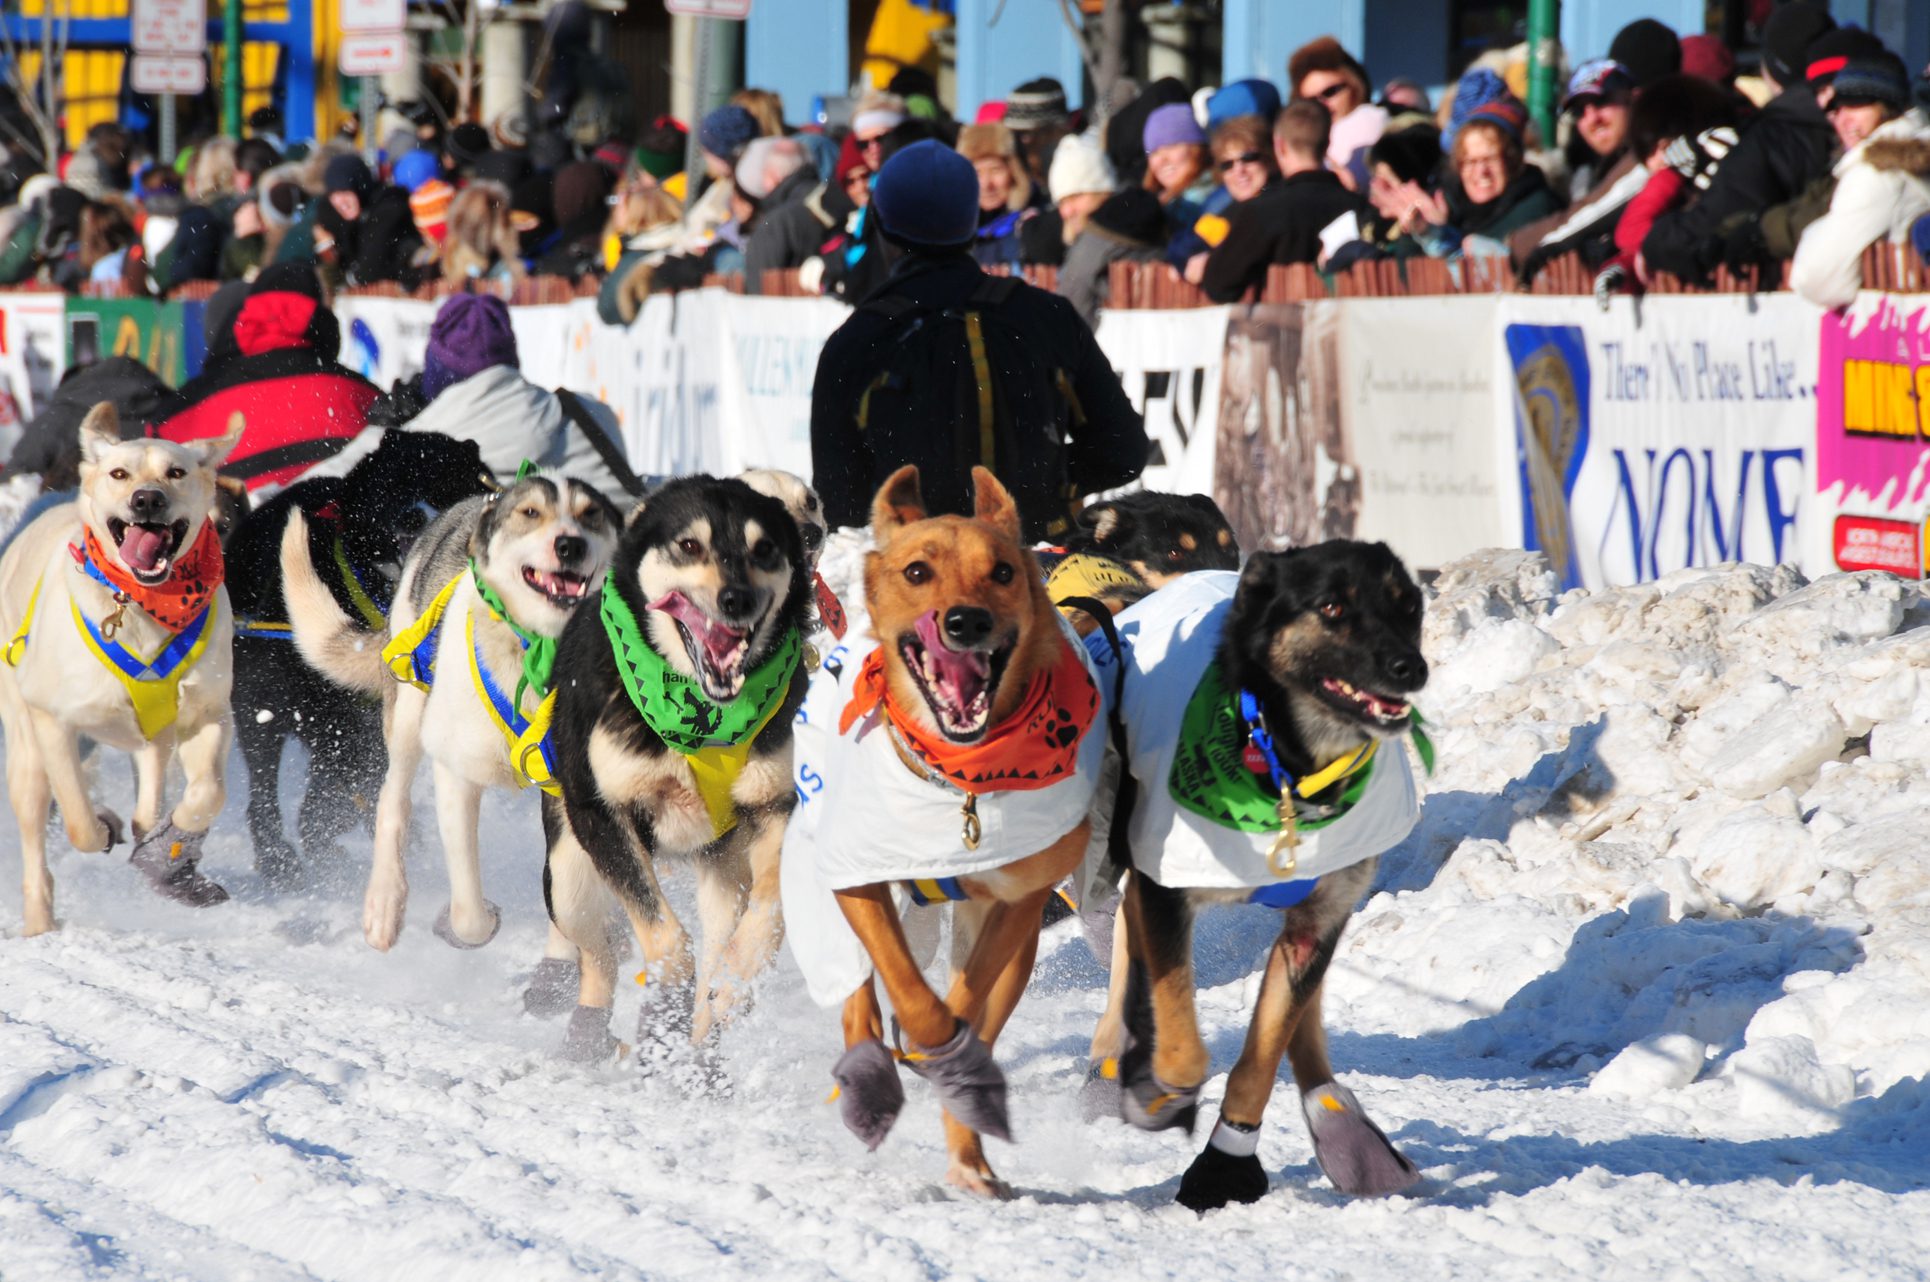 Iditarod Photos and Images & Pictures